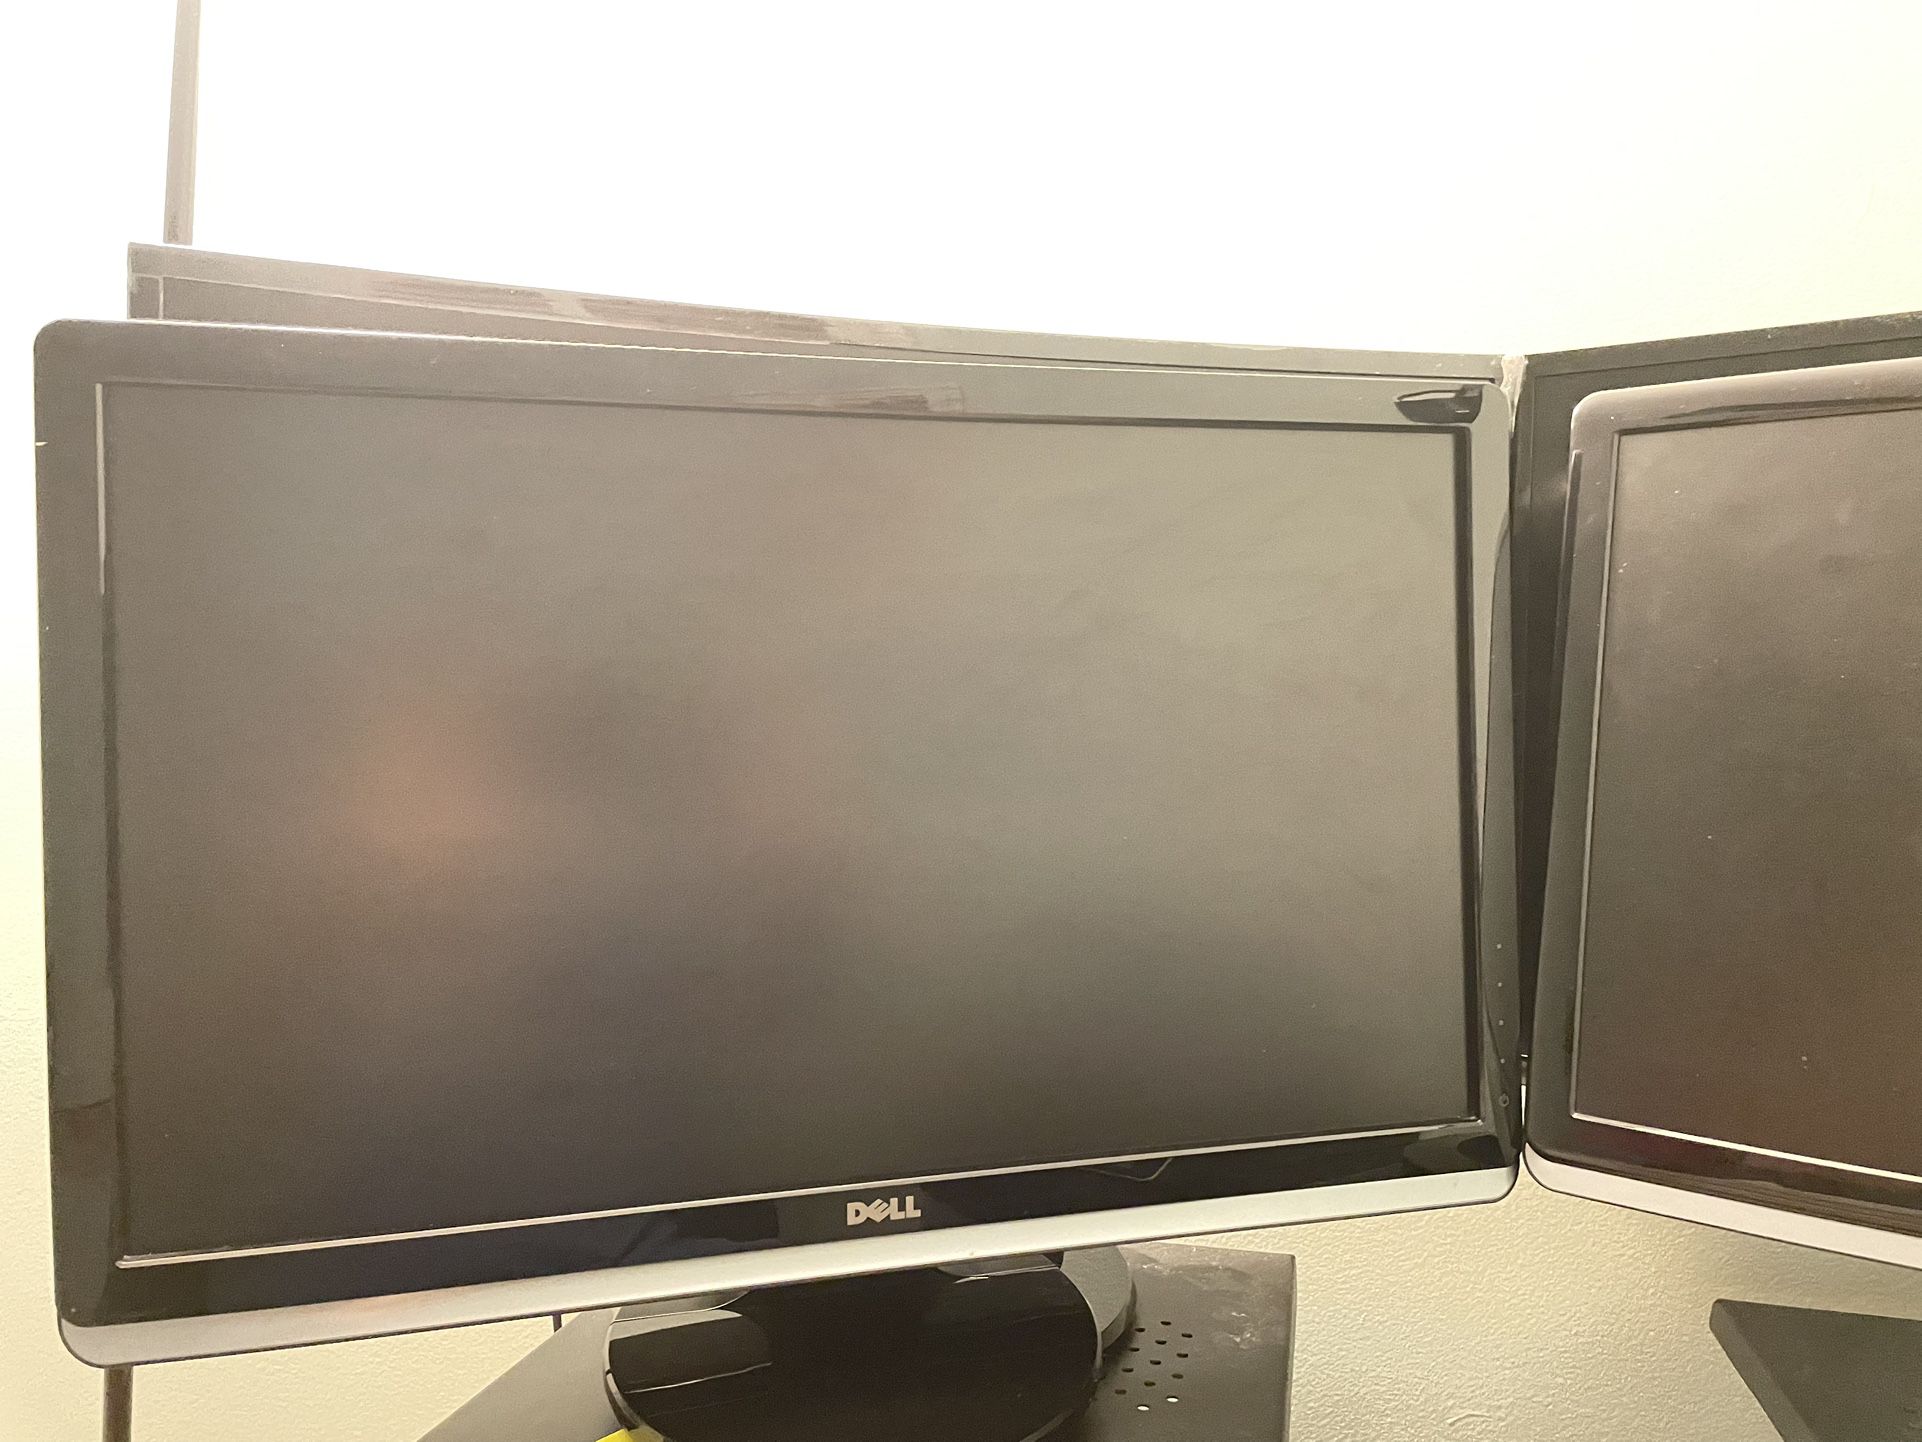 Pair Of Monitors :: In Working condition